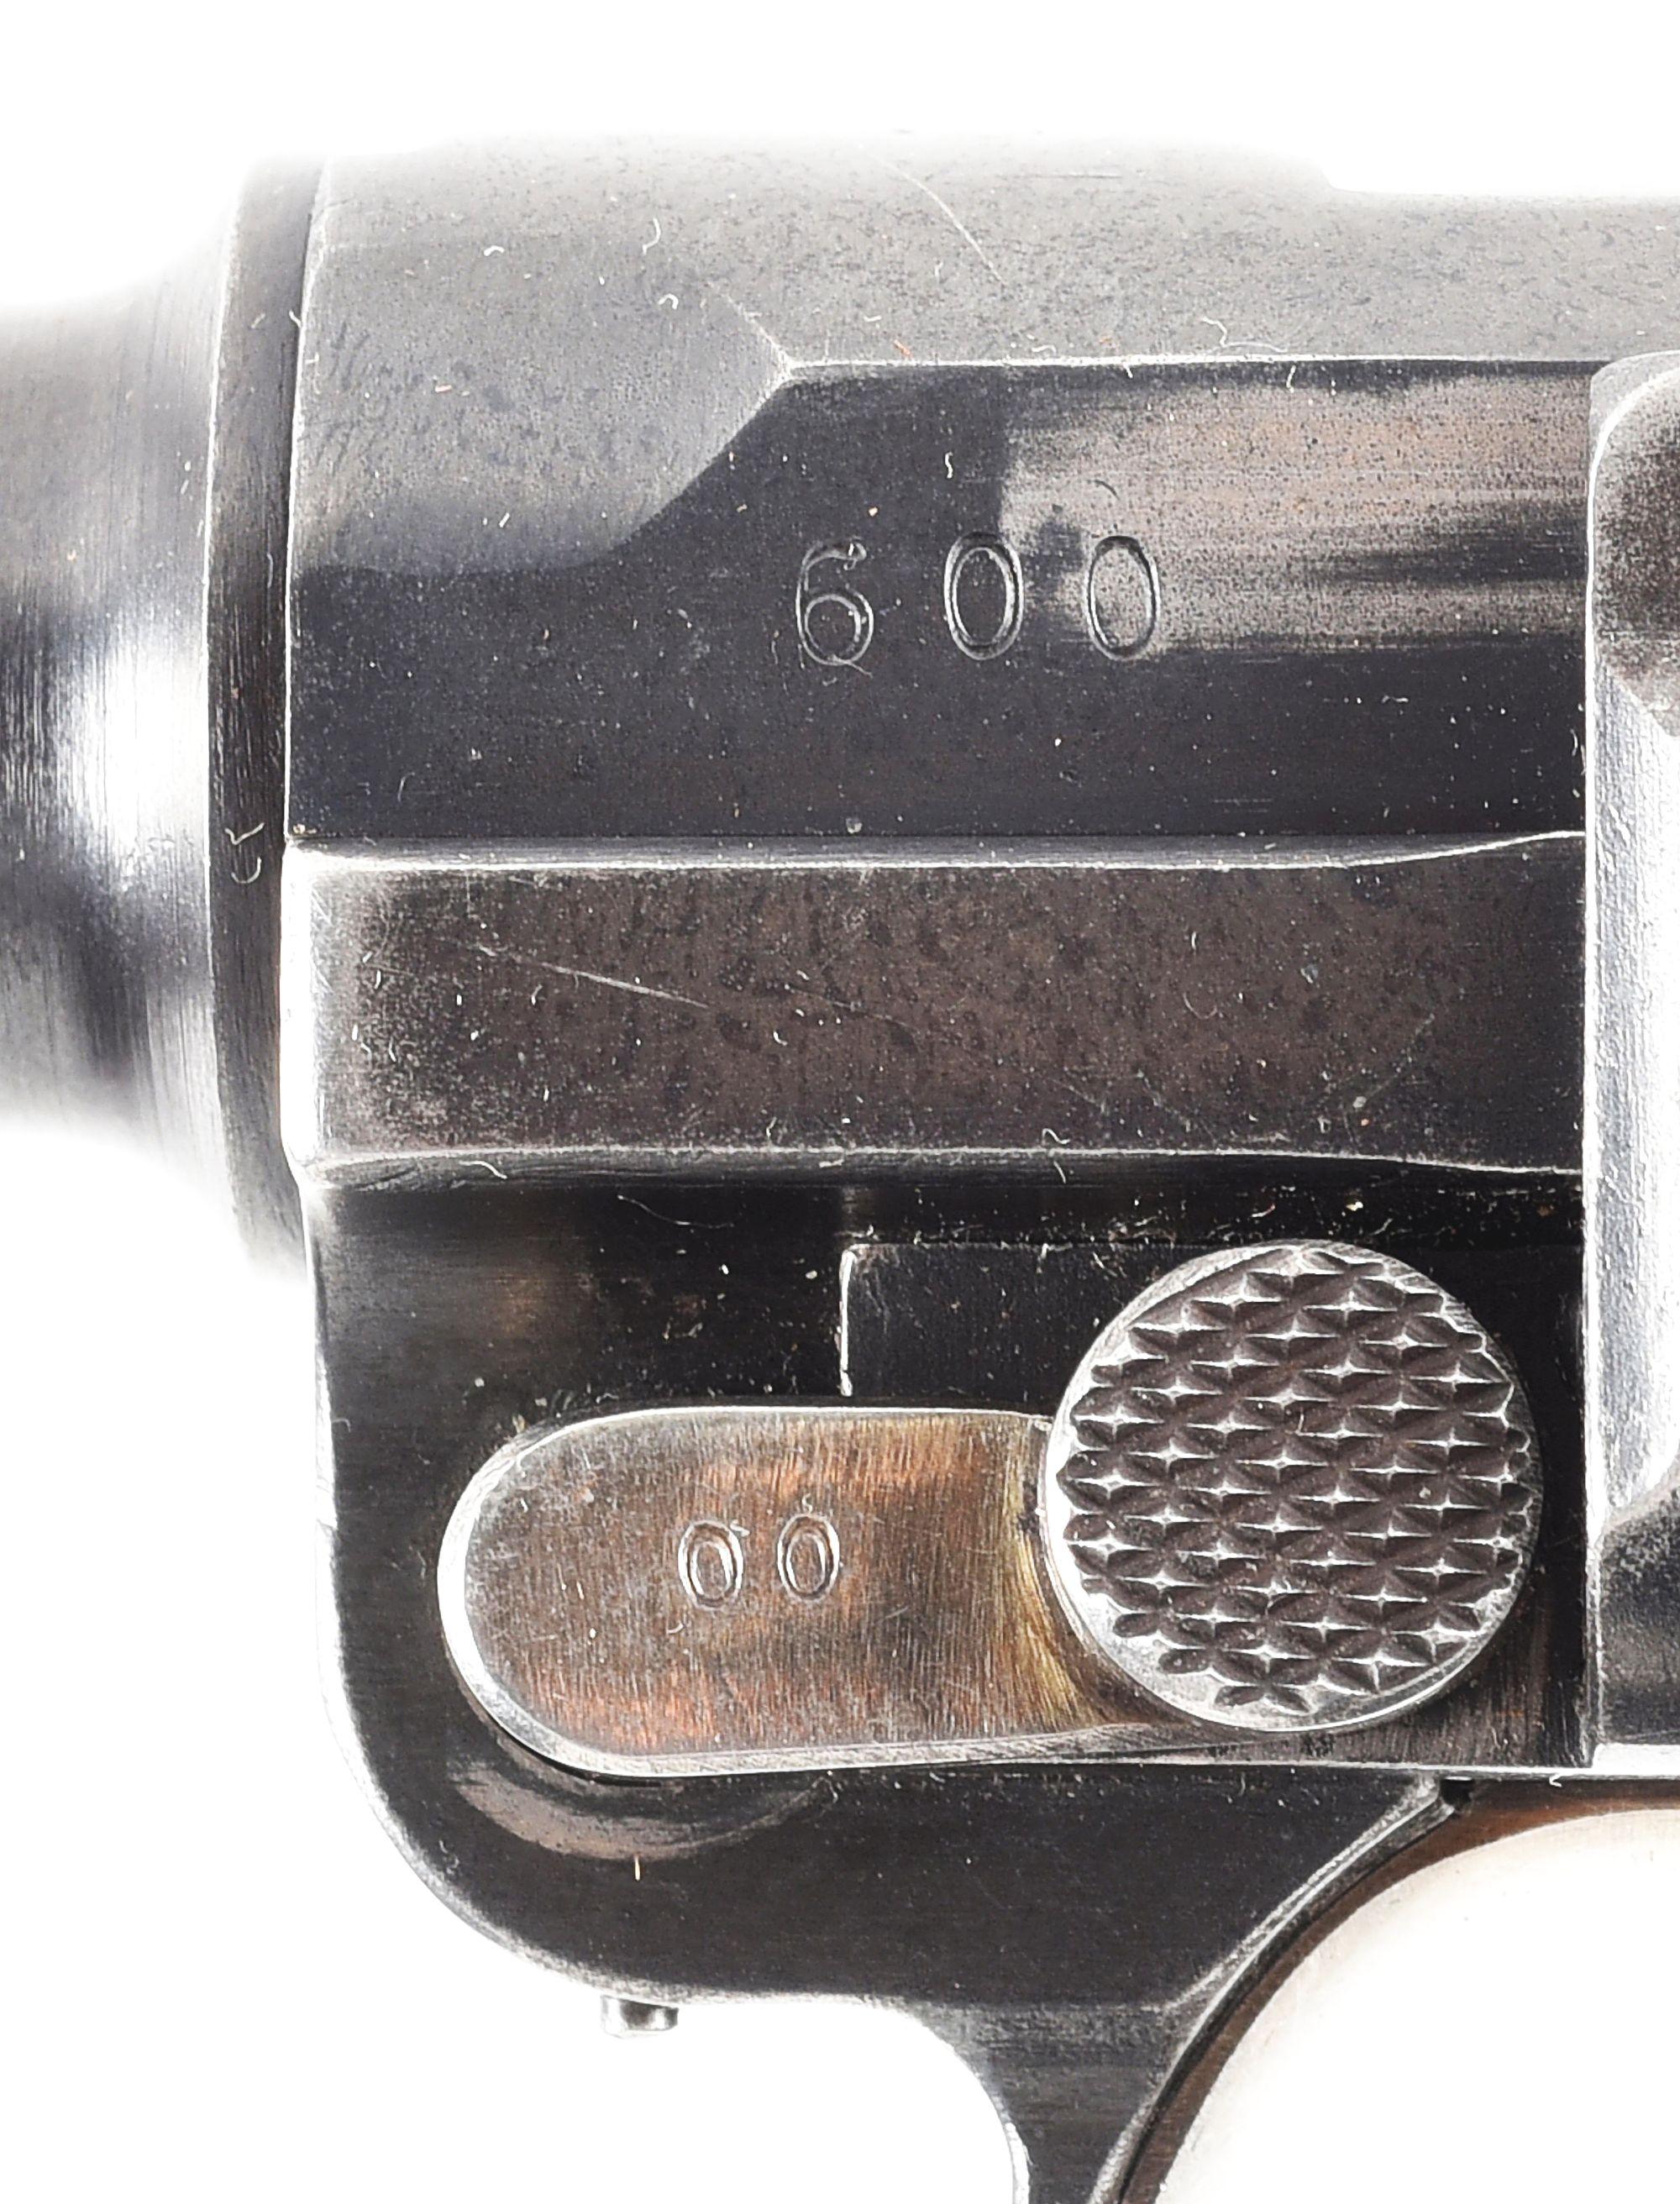 (C) ERFURT 1917 LUGER SEMI-AUTOMATIC PISTOL WITH EARLY DEATH HEAD MARKINGS